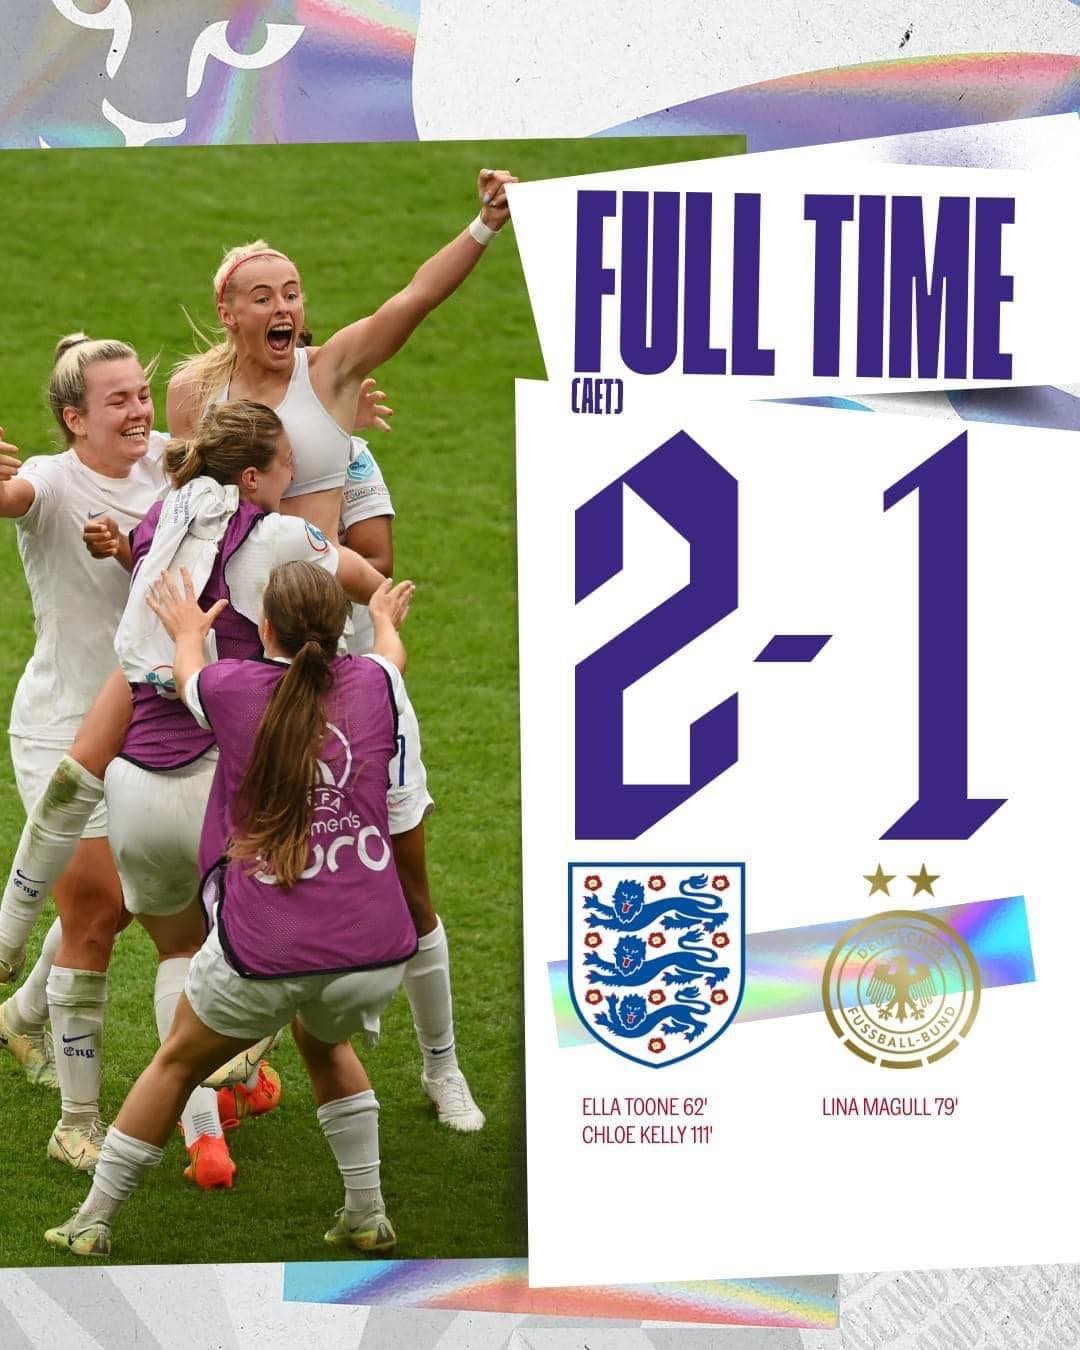 Join Brooklyn Creed on Good Morning Britain at 6am this morning as the nation celebrates the amazing achievement of ‘The Lionesses’ victory over Germany to secure the UEFA Womens Euro Championship….So good, so good, so good!!!

#gmb #HelloAgainshow #Lionesses #Champions #womenseuro2022